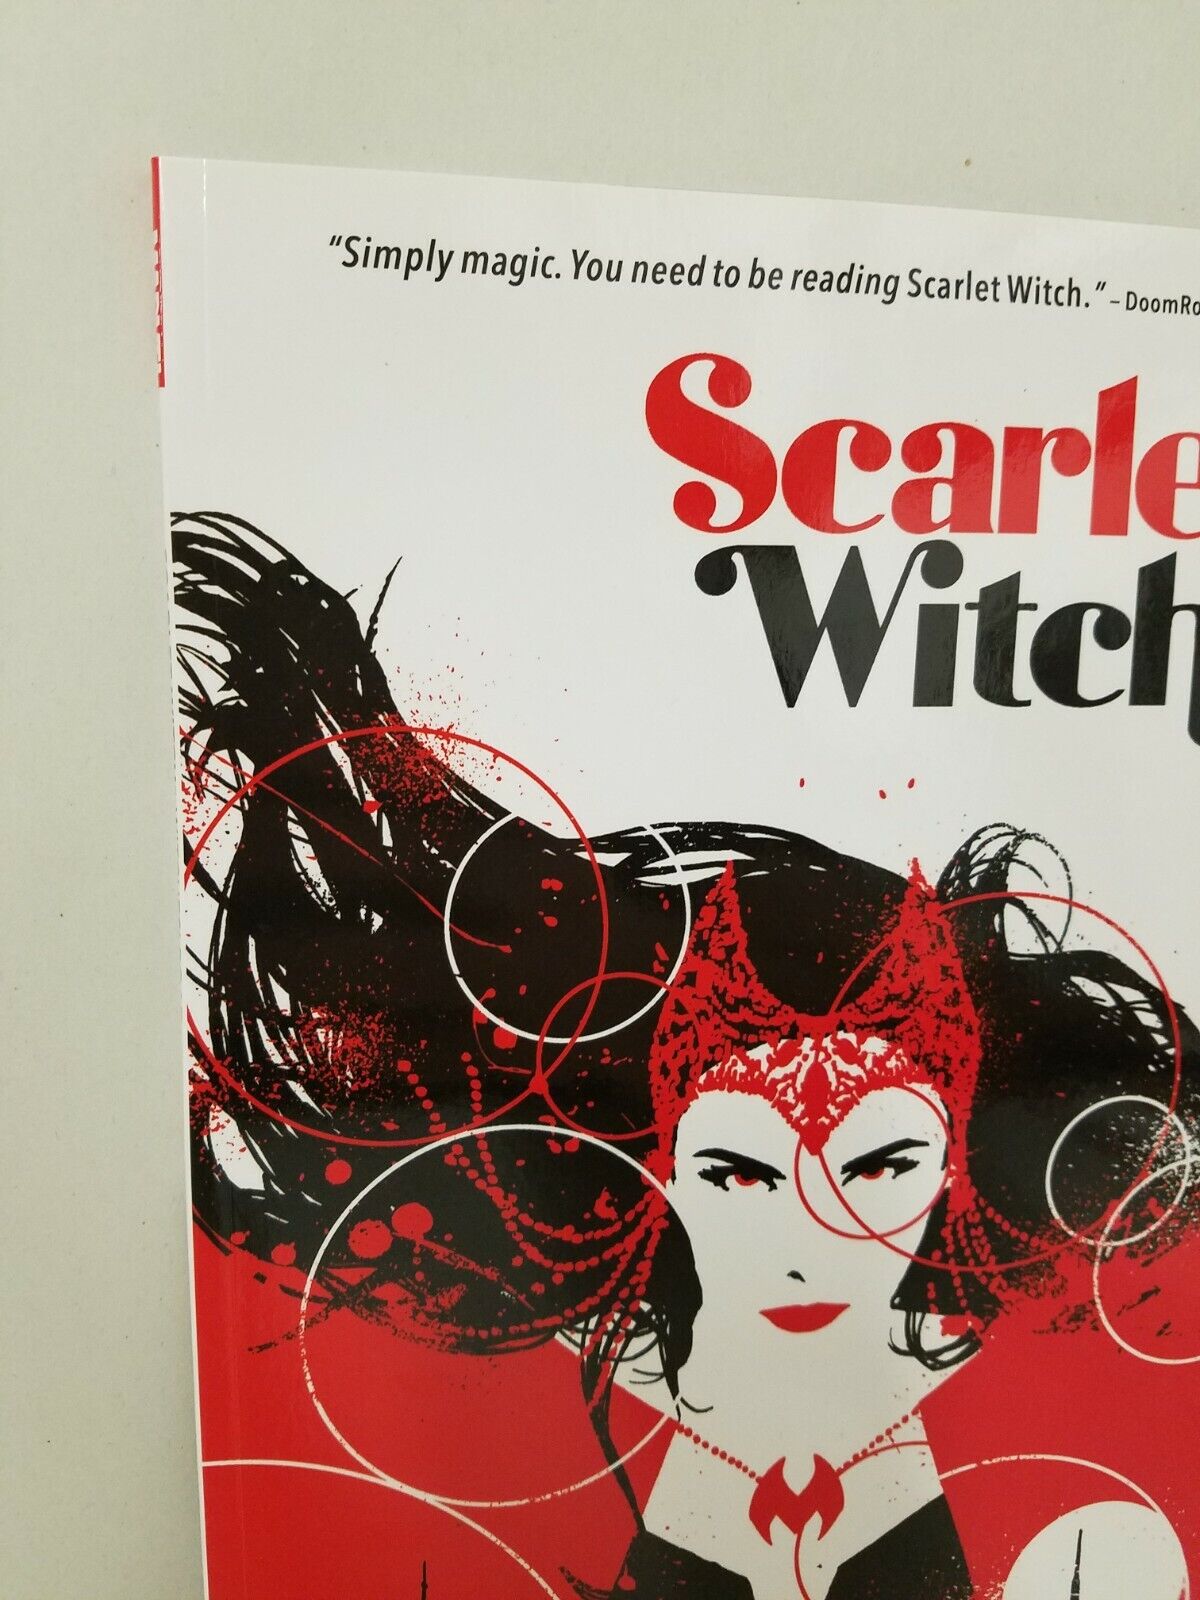 Scarlet Witch Vol 1 Witches' Road (2016) Marvel TPB Wanda Vision David Aja New